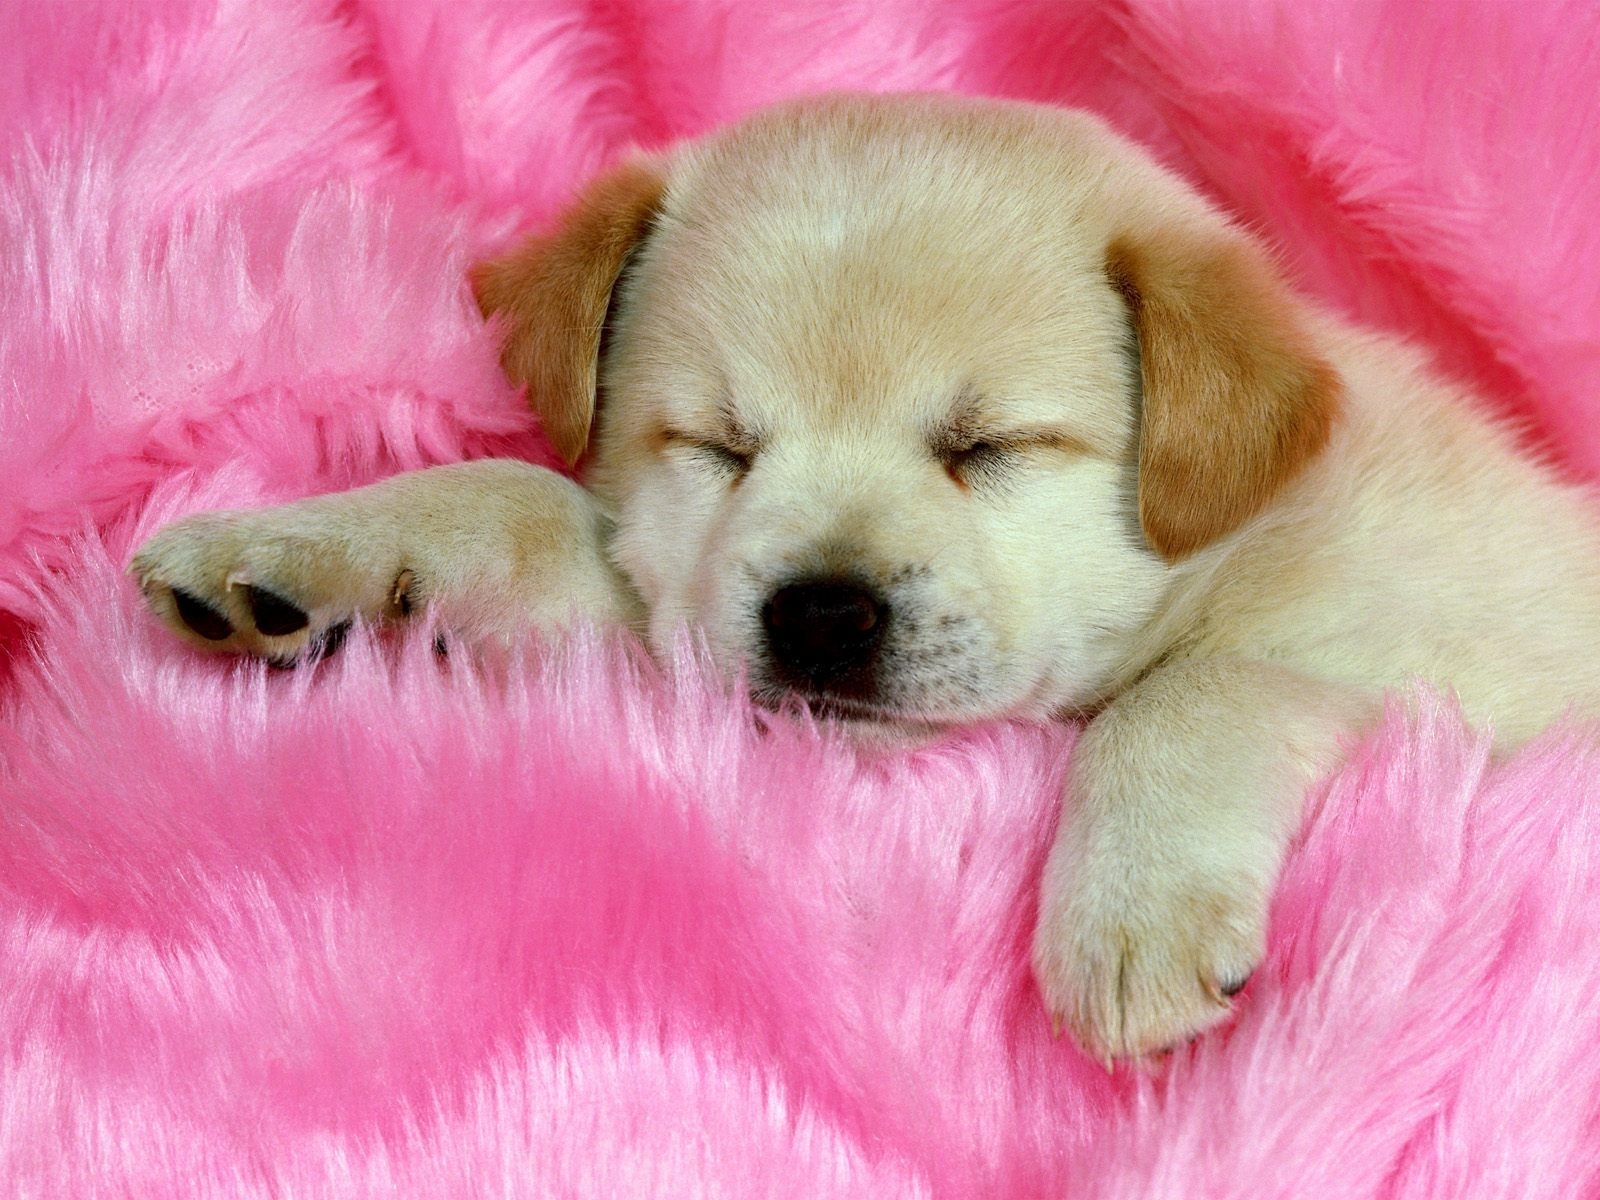 10 New Cute Puppies Wallpapers Free Download FULL HD 1080p For PC Background